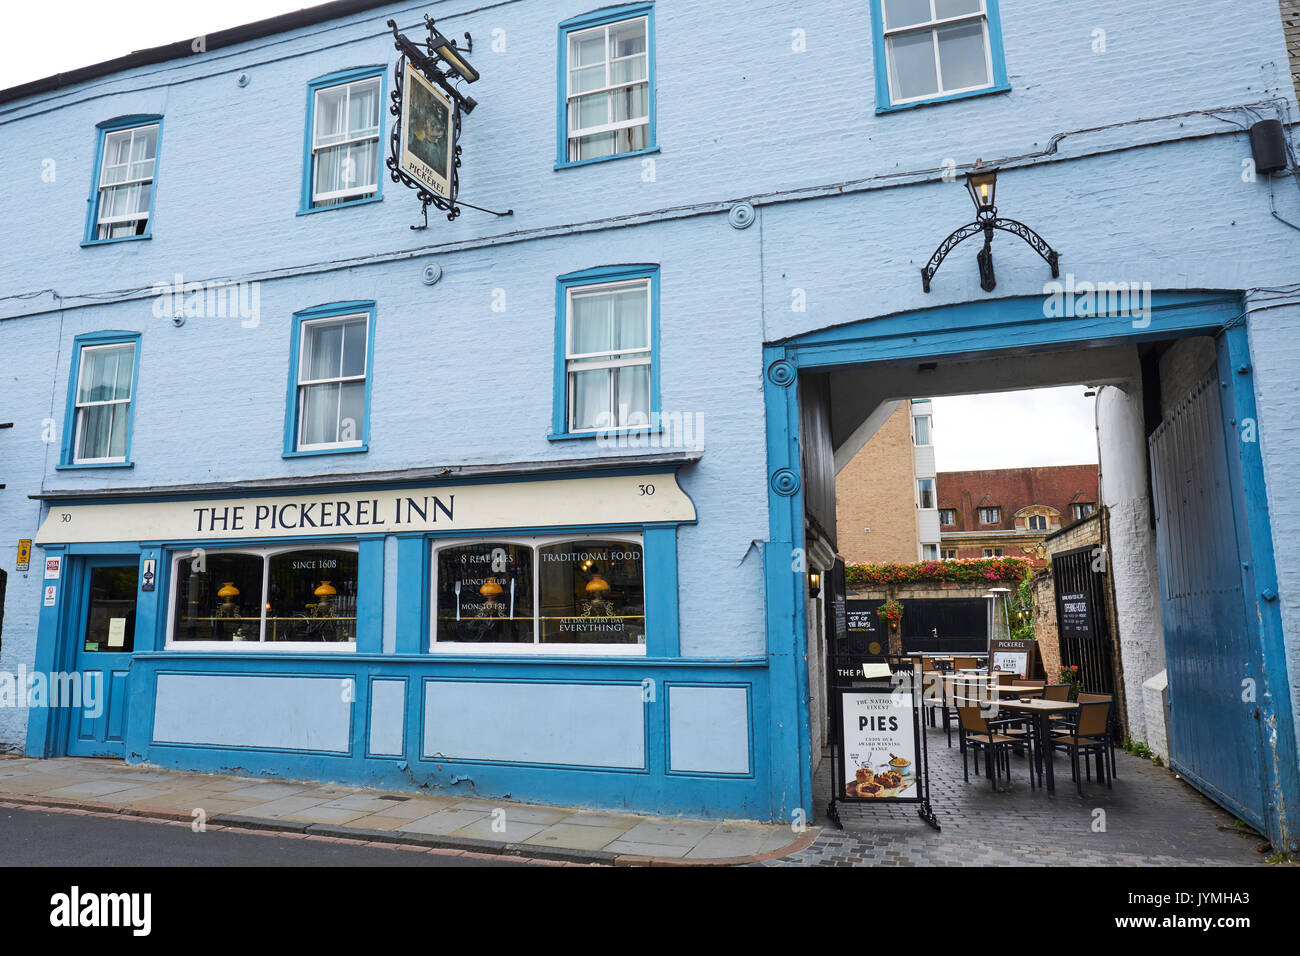 The Pickerel Inn One Of The Oldest Pubs In Cambridge, Magdalene Street, Cambridge, UK Stock Photo